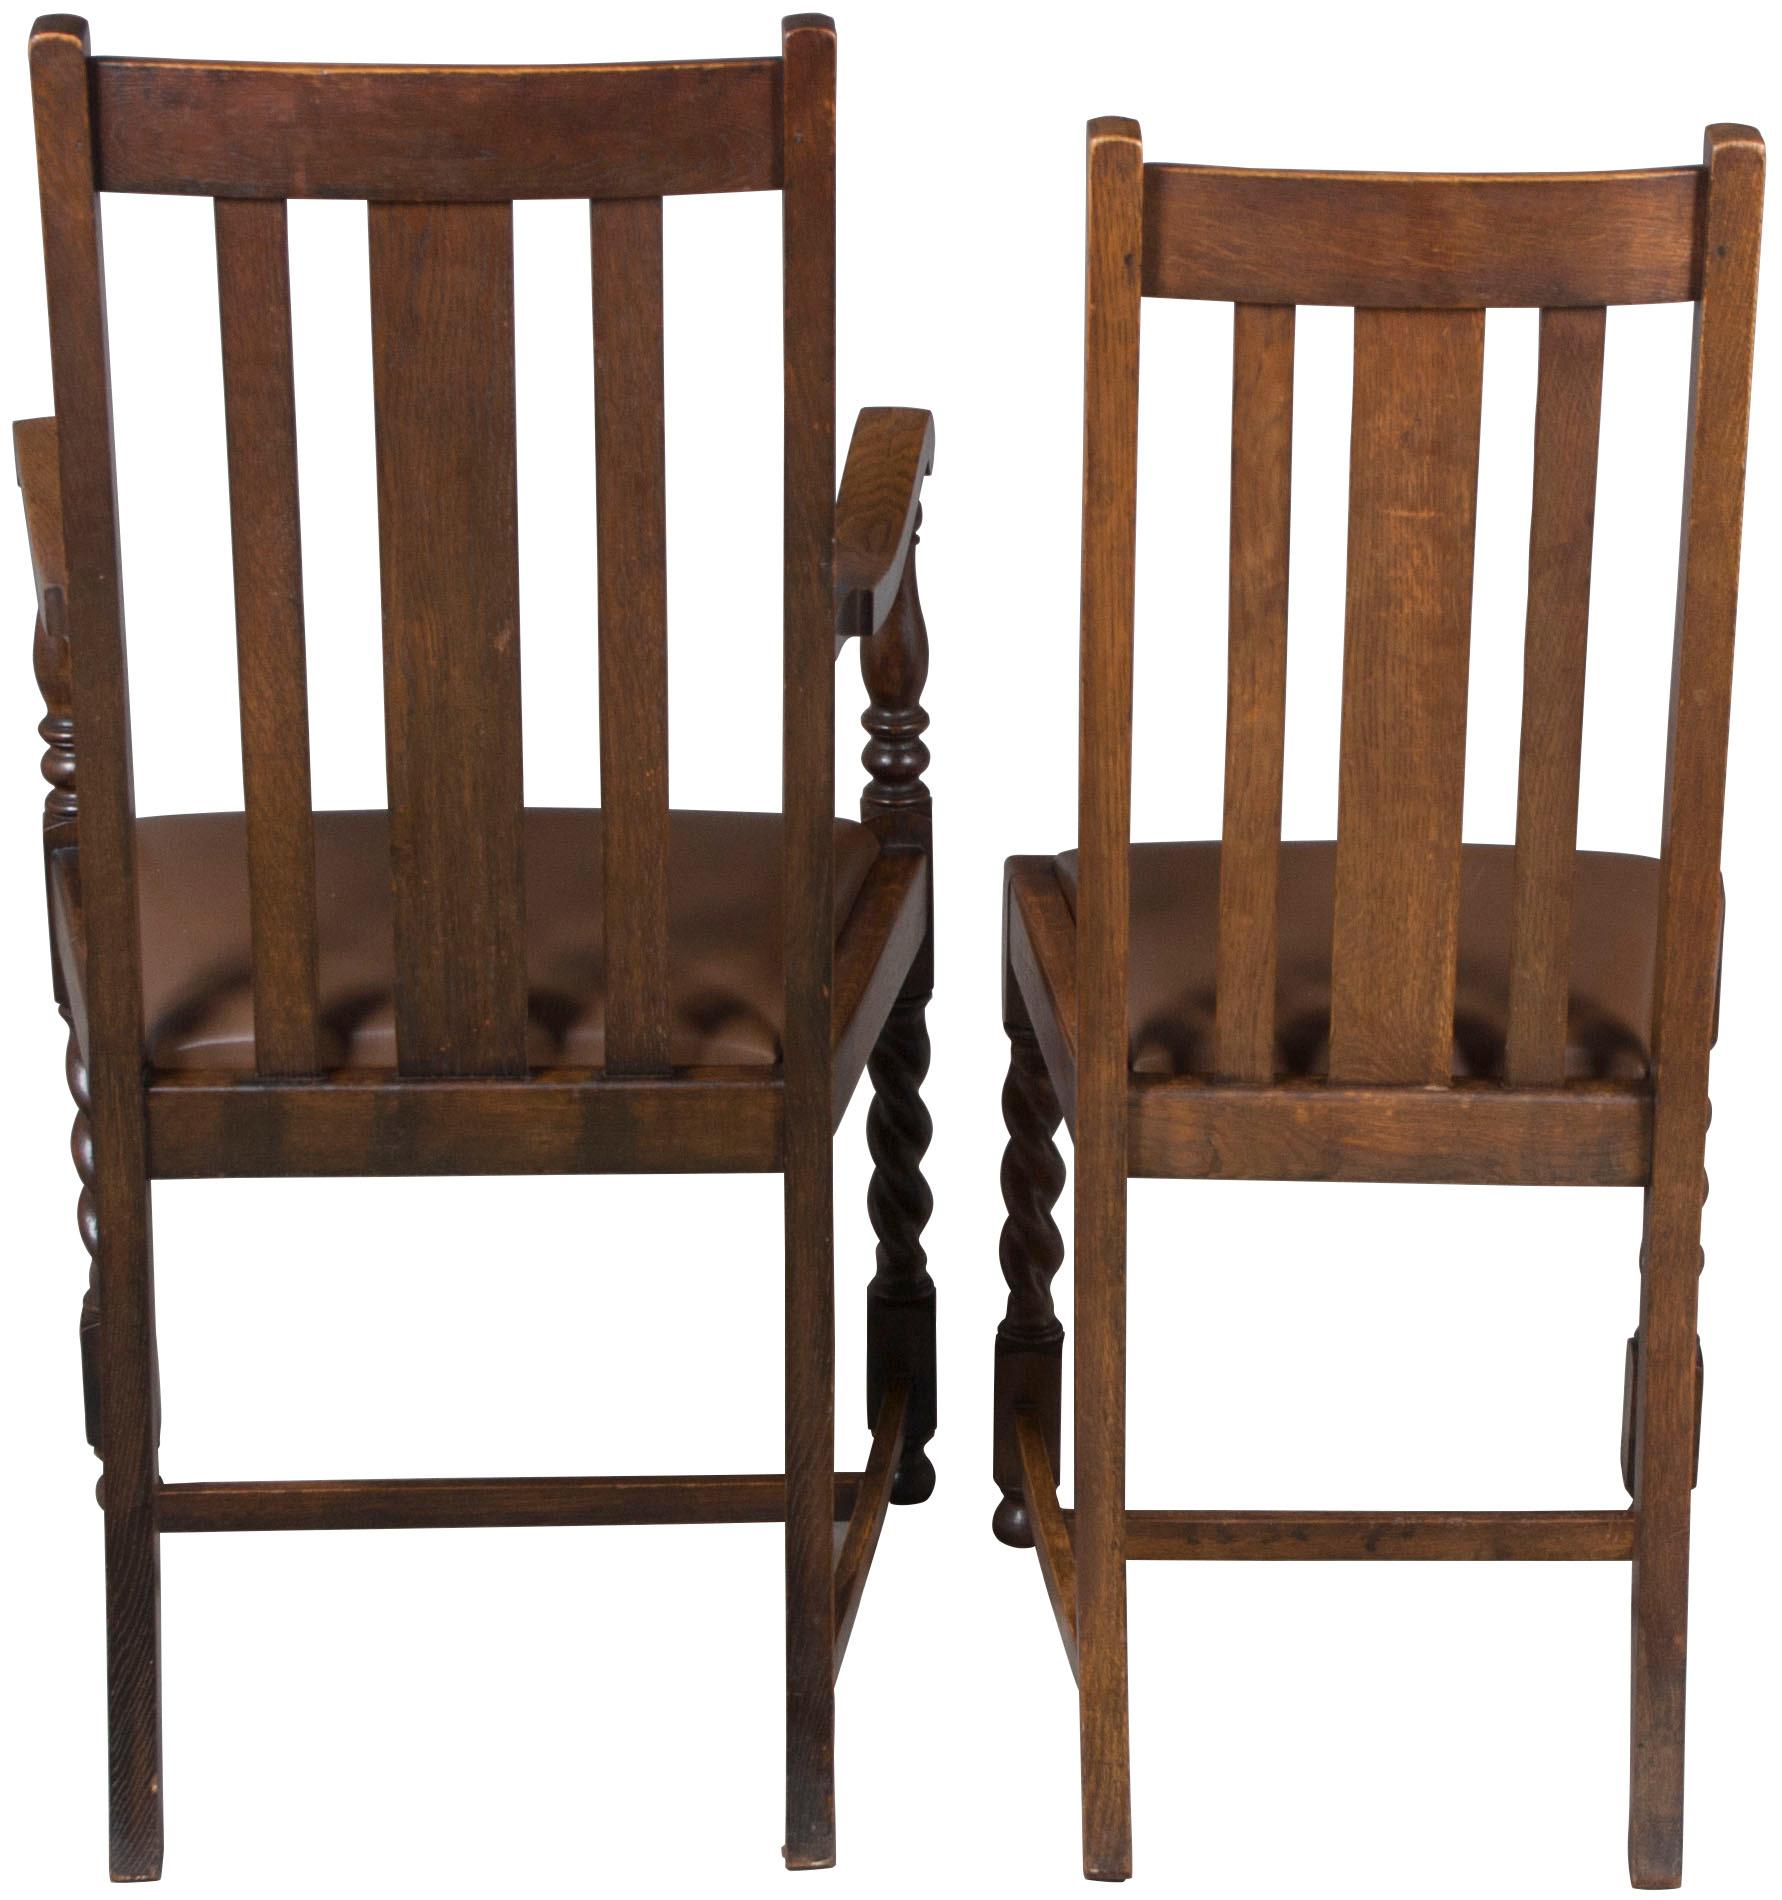 English Set of Four Oak Barley Twist Dining Room or Kitchen Chairs